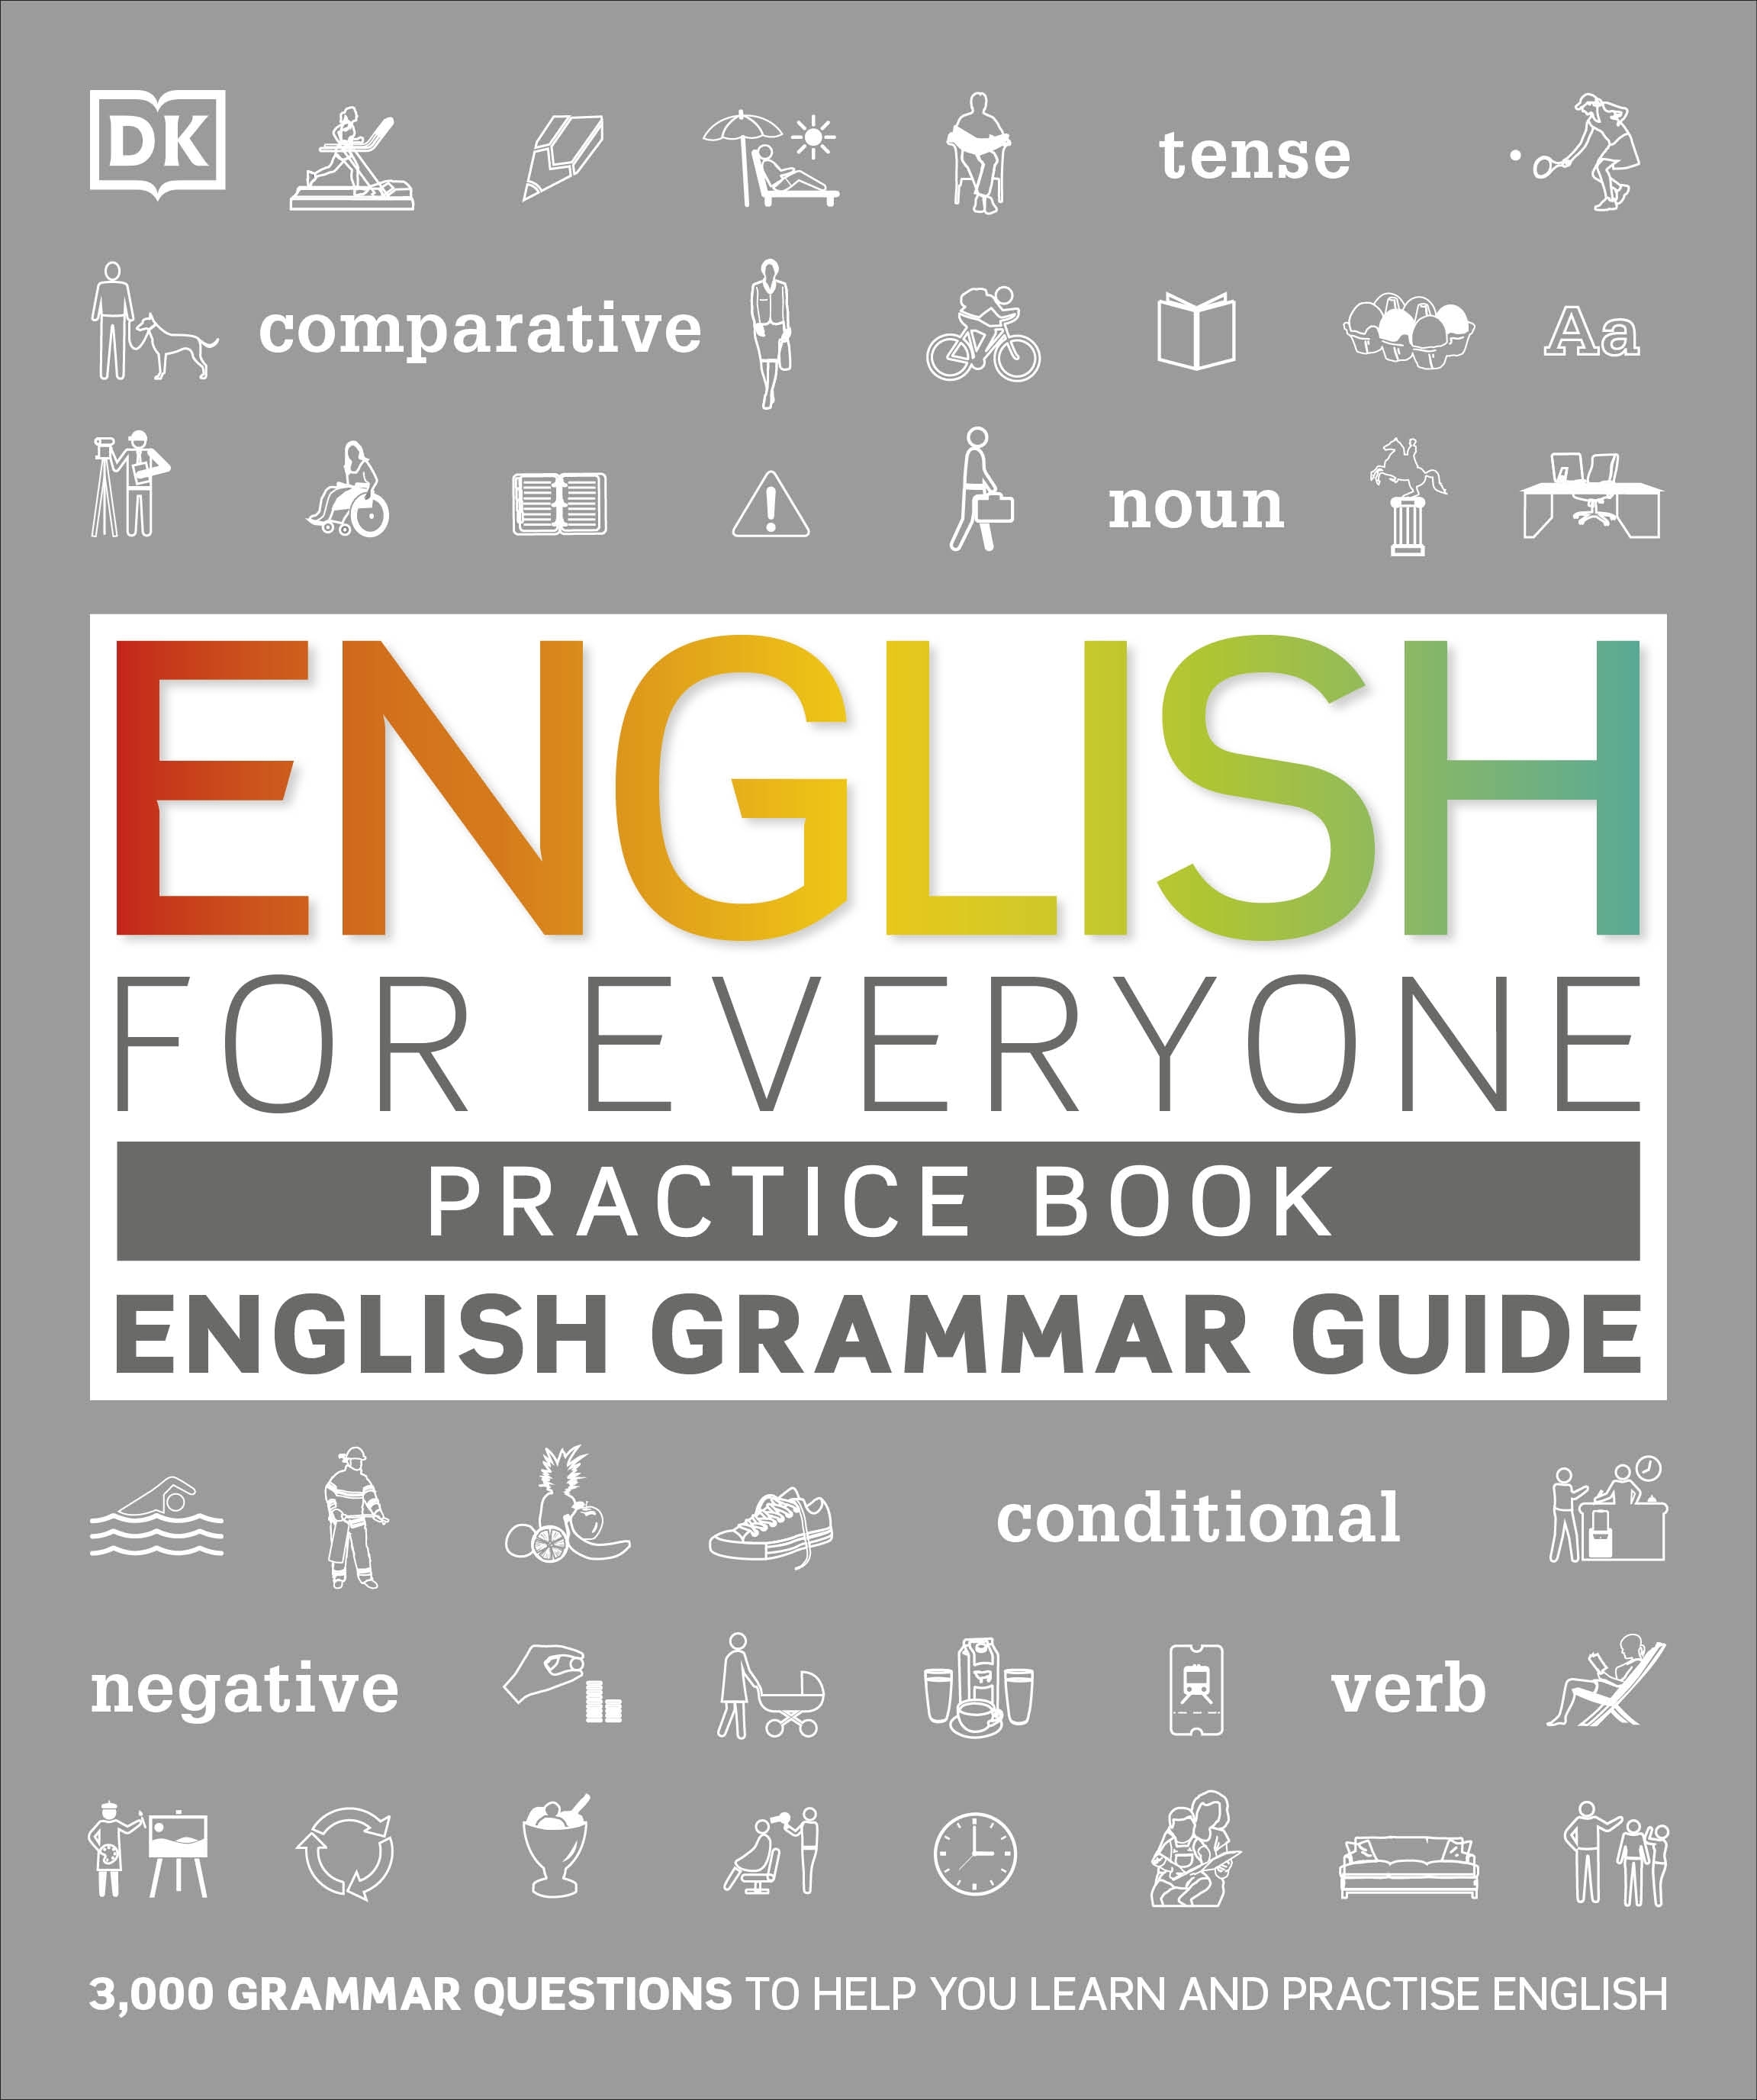 English for Everyone English Grammar Guide Practice Book by DK